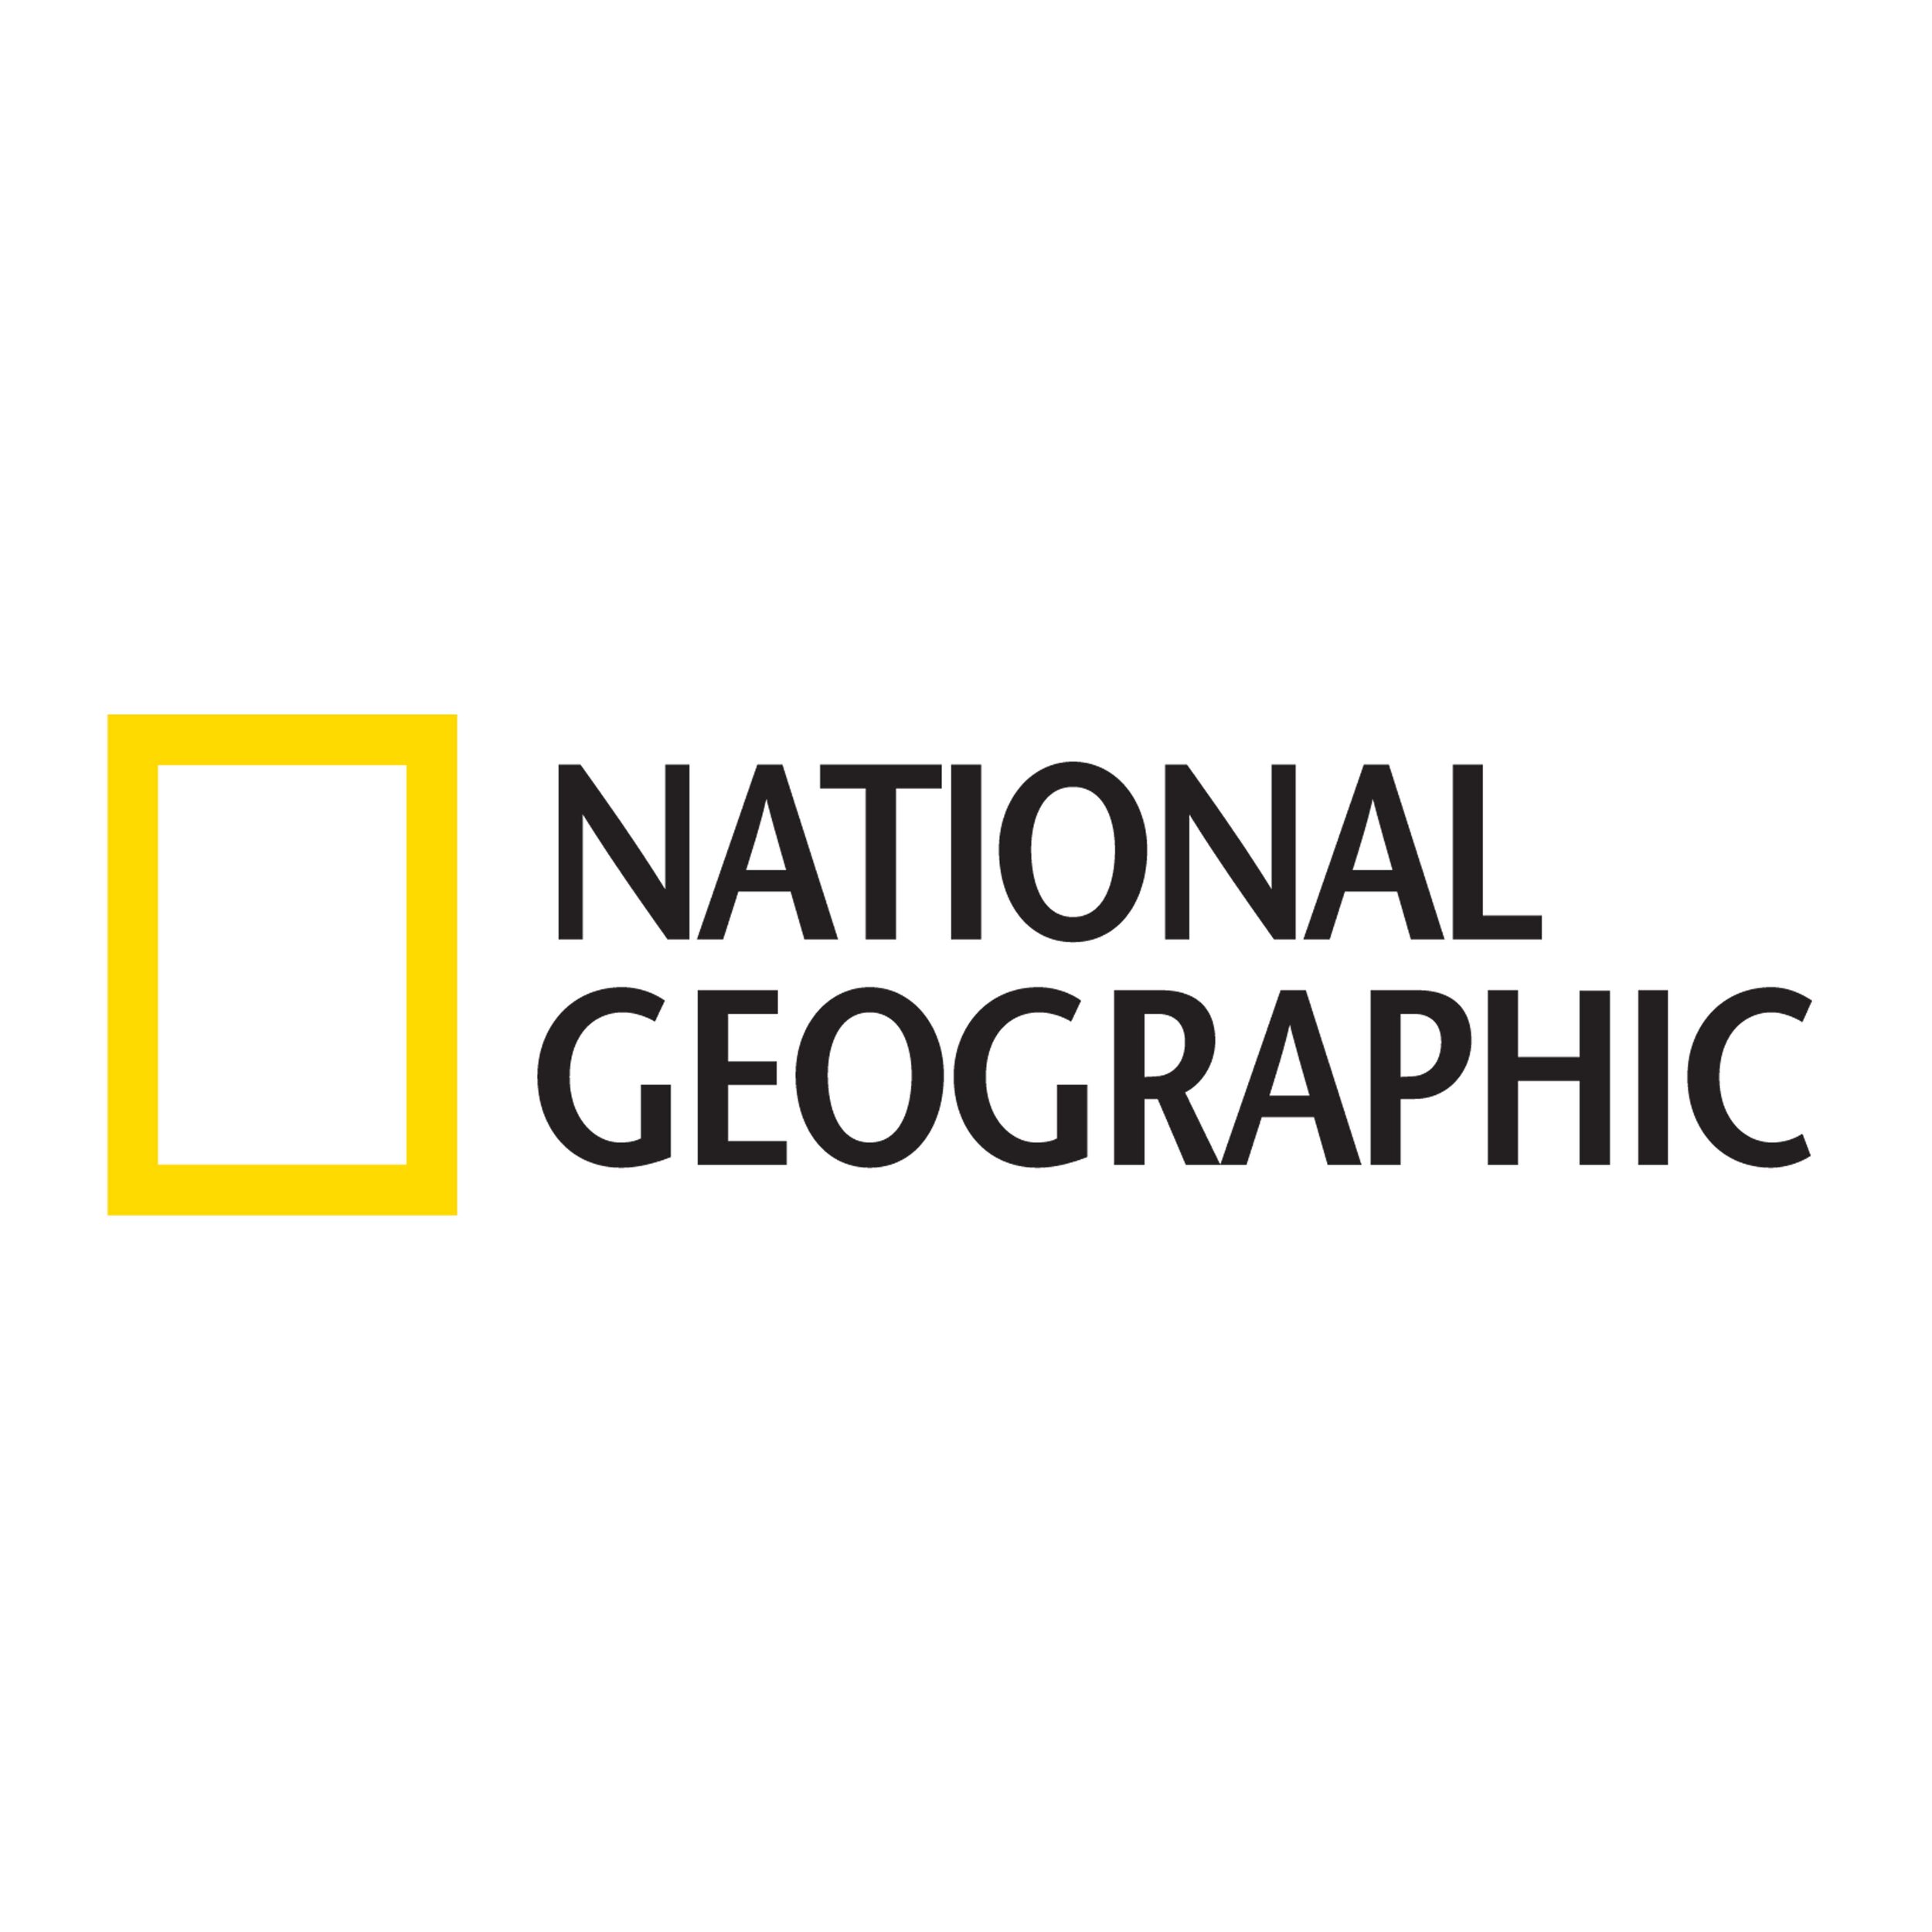 1X1 NATIONAL GEOGRAPHIC LOW.jpg